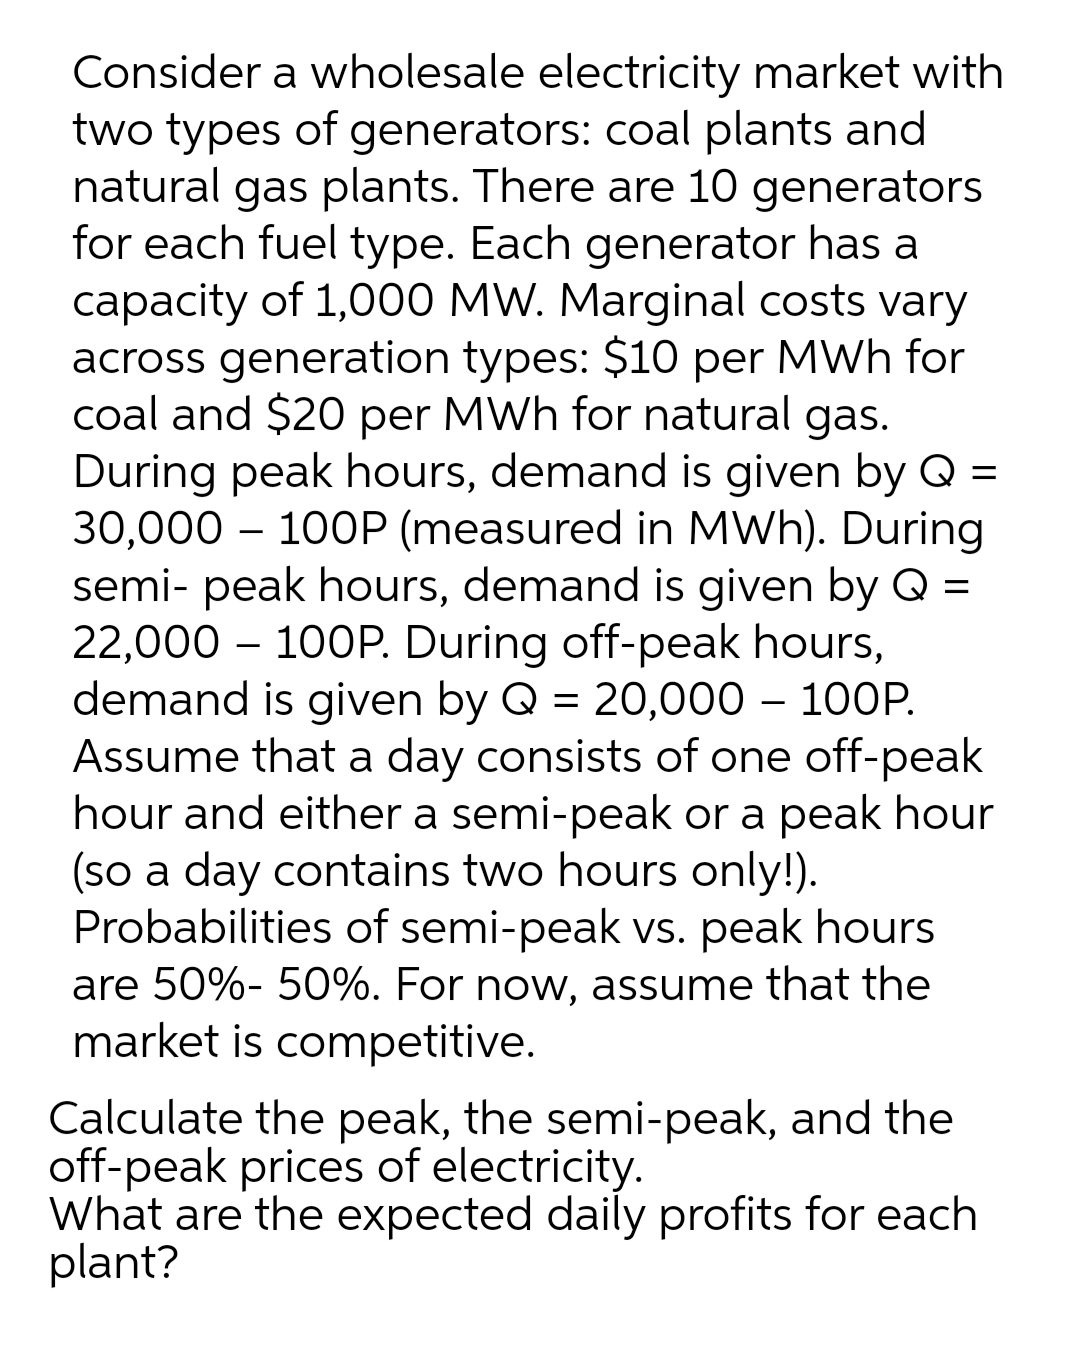 Consider a wholesale electricity market with
two types of generators: coal plants and
natural gas plants. There are 10 generators
for each fuel type. Each generator has a
capacity of 1,000 MW. Marginal costs vary
across generation types: $10 per MWh for
coal and $20 per MWh for natural gas.
During peak hours, demand is given by Q =
30,000 – 100P (measured in MWh). During
semi- peak hours, demand is given by Q =
22,000 – 100P. During off-peak hours,
demand is given by Q = 20,000 – 100P.
Assume that a day consists of one off-peak
hour and either a semi-peak or a peak hour
(so a day contains two hours only!).
Probabilities of semi-peak vs. peak hours
are 50%- 50%. For now, assume that the
market is competitive.
Calculate the peak, the semi-peak, and the
off-peak prices of electricity.
What are the expected daily profits for each
plant?
